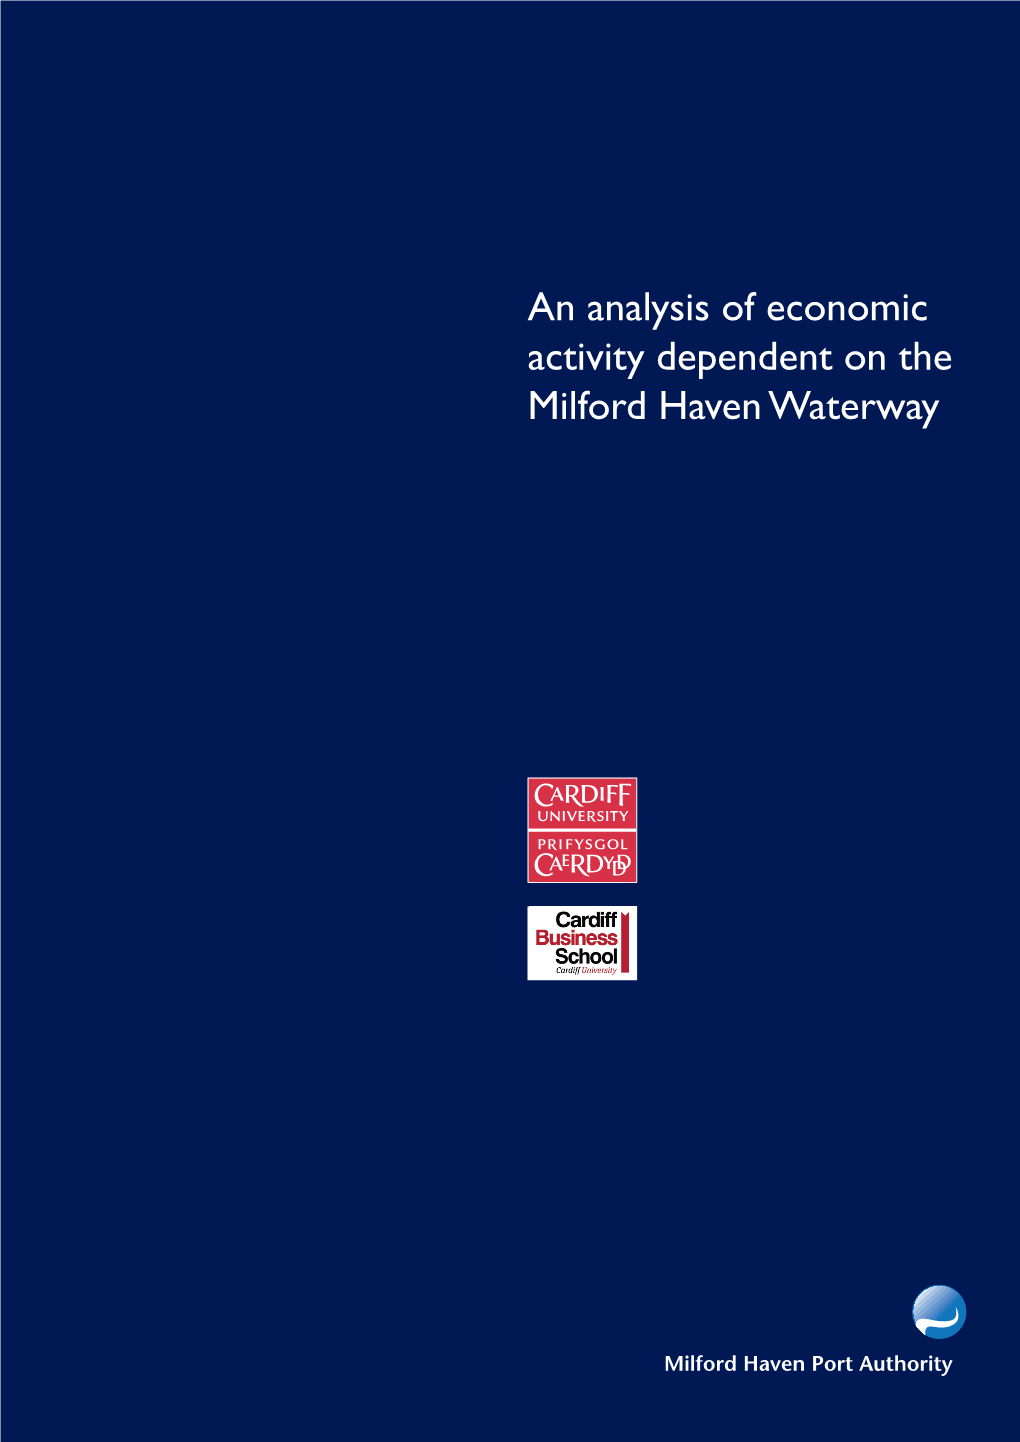 An Analysis of Economic Activity Dependent on the Milford Haven Waterway MHPA Cardiff Uni Report Layout 1 06/02/2012 13:55 Page 2